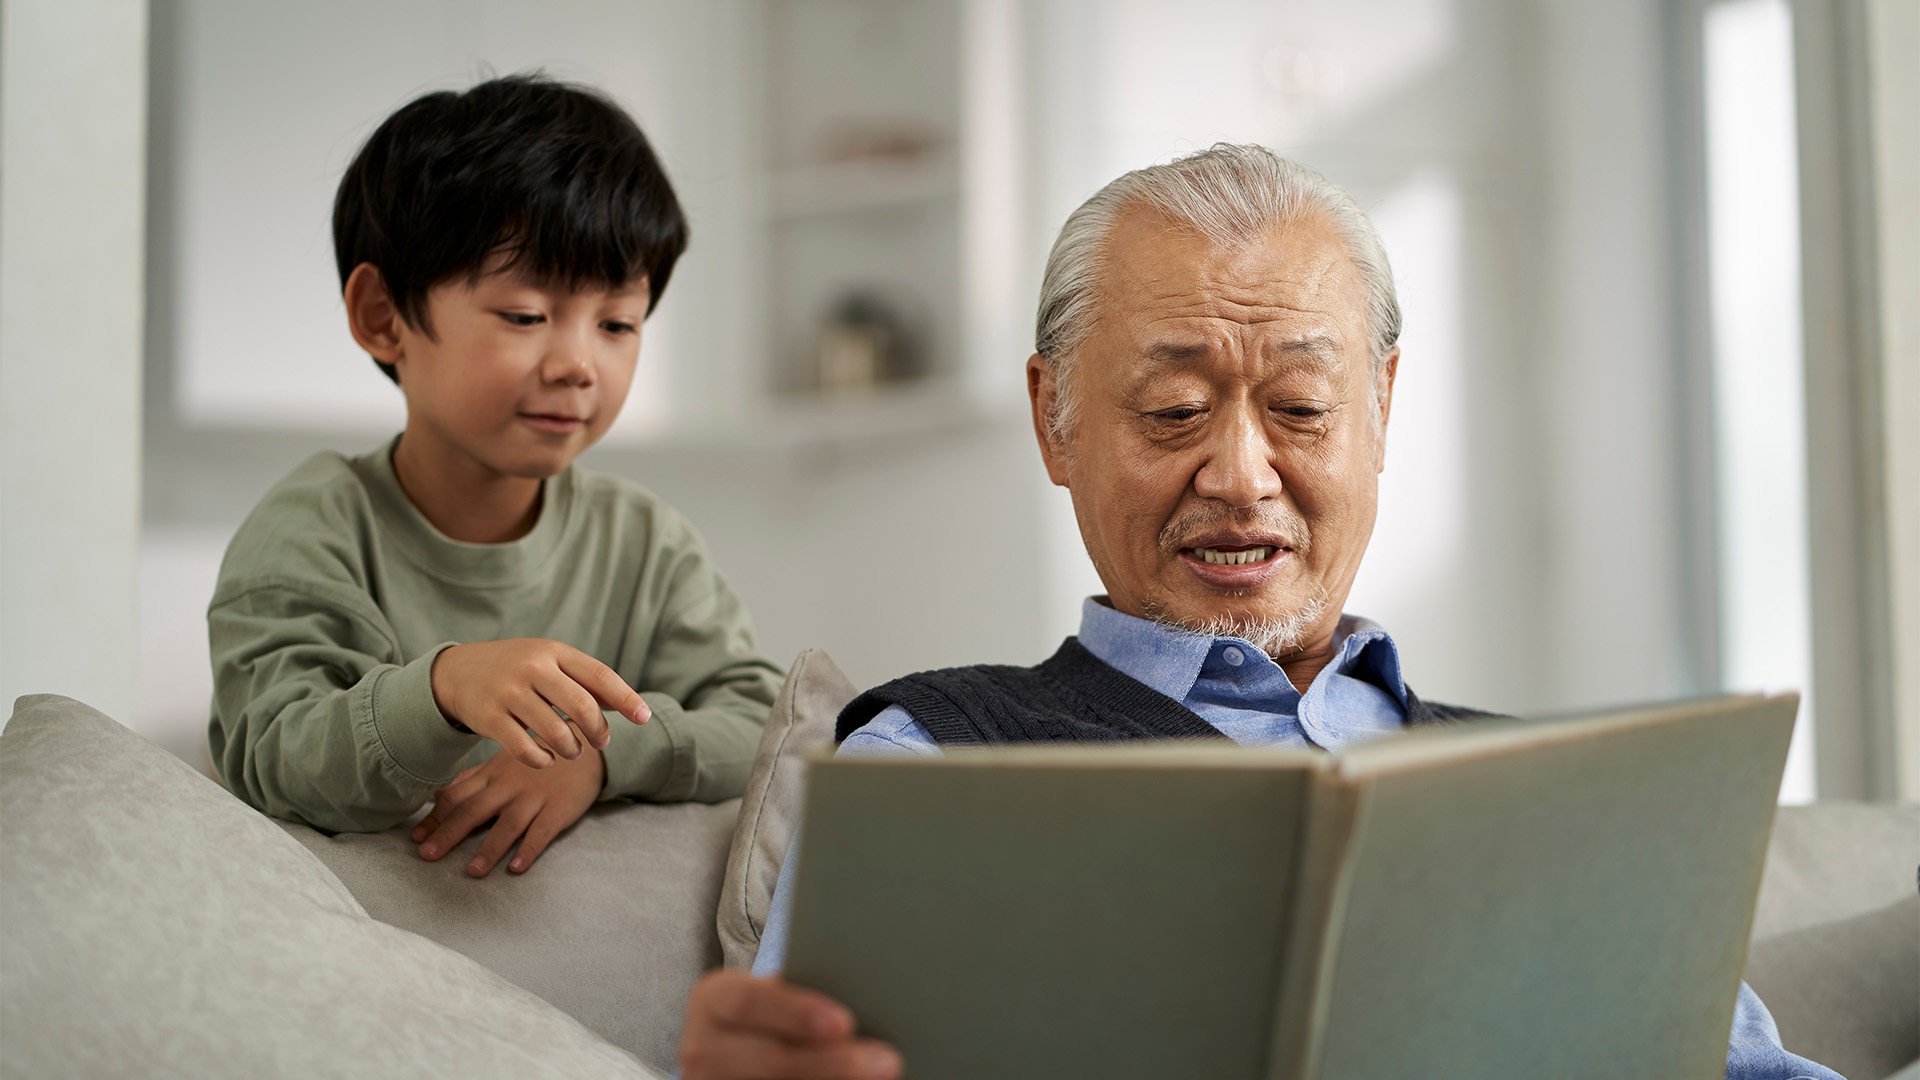 Old people in China are migrating, both domestically and overseas, to be with their families. The Post takes a closer look at the mainland’s so-called elderly drifters. Photo: Shutterstock